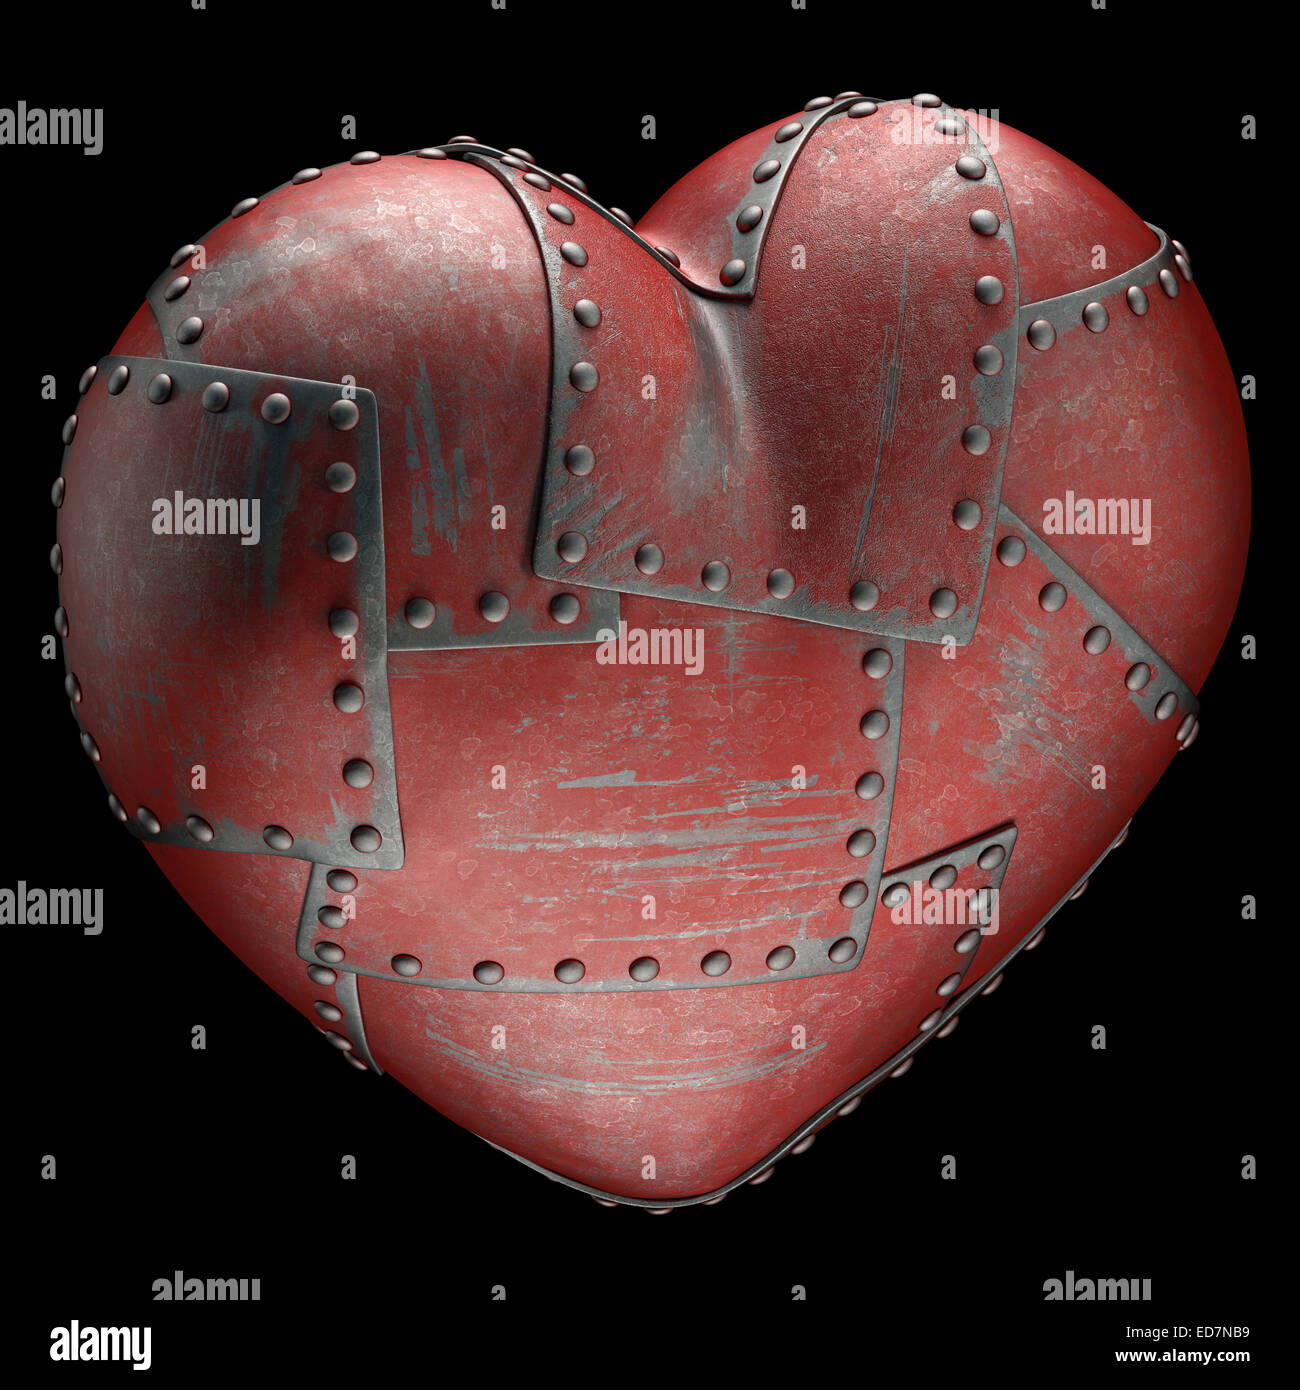 Heart made of steel plates attached with rivets. Clipping path included. Stock Photo